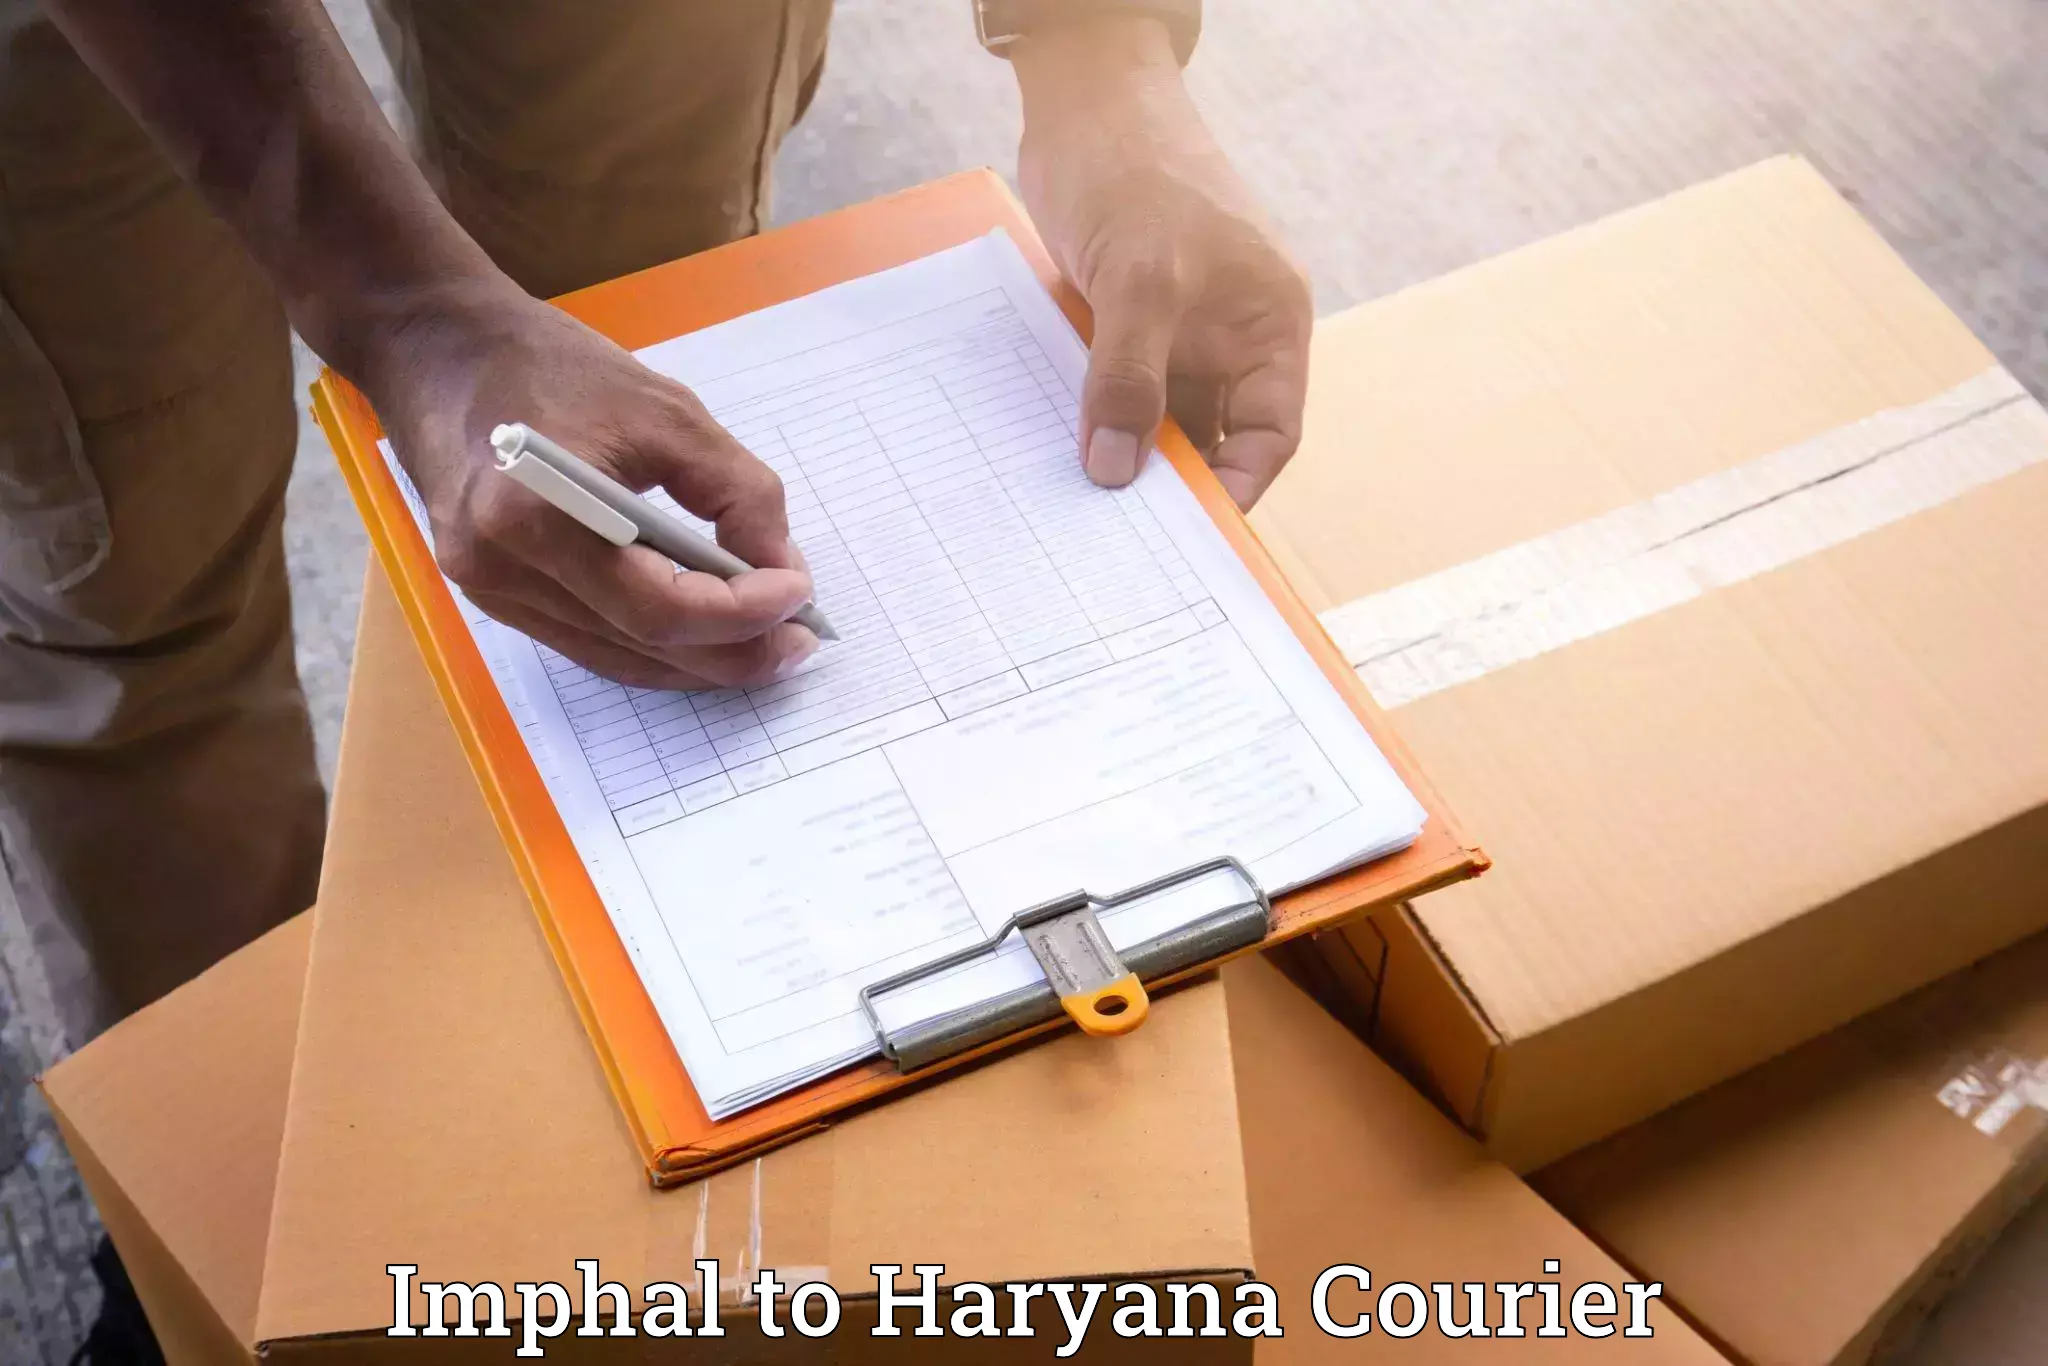 Hassle-free relocation Imphal to Bilaspur Haryana